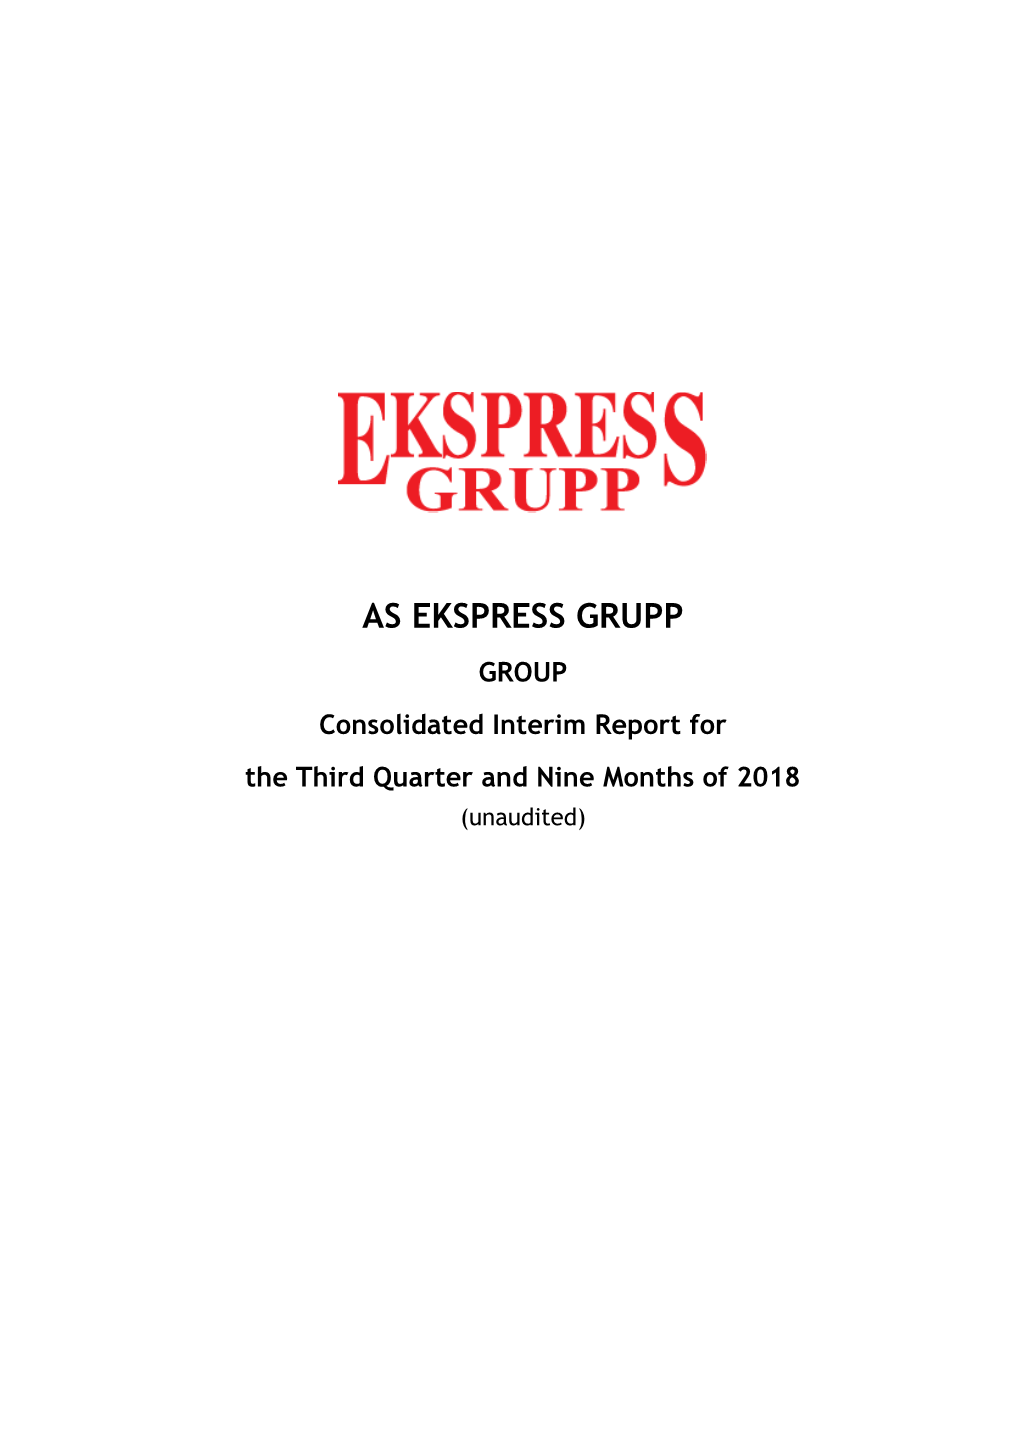 AS EKSPRESS GRUPP GROUP Consolidated Interim Report for the Third Quarter and Nine Months of 2018 (Unaudited)